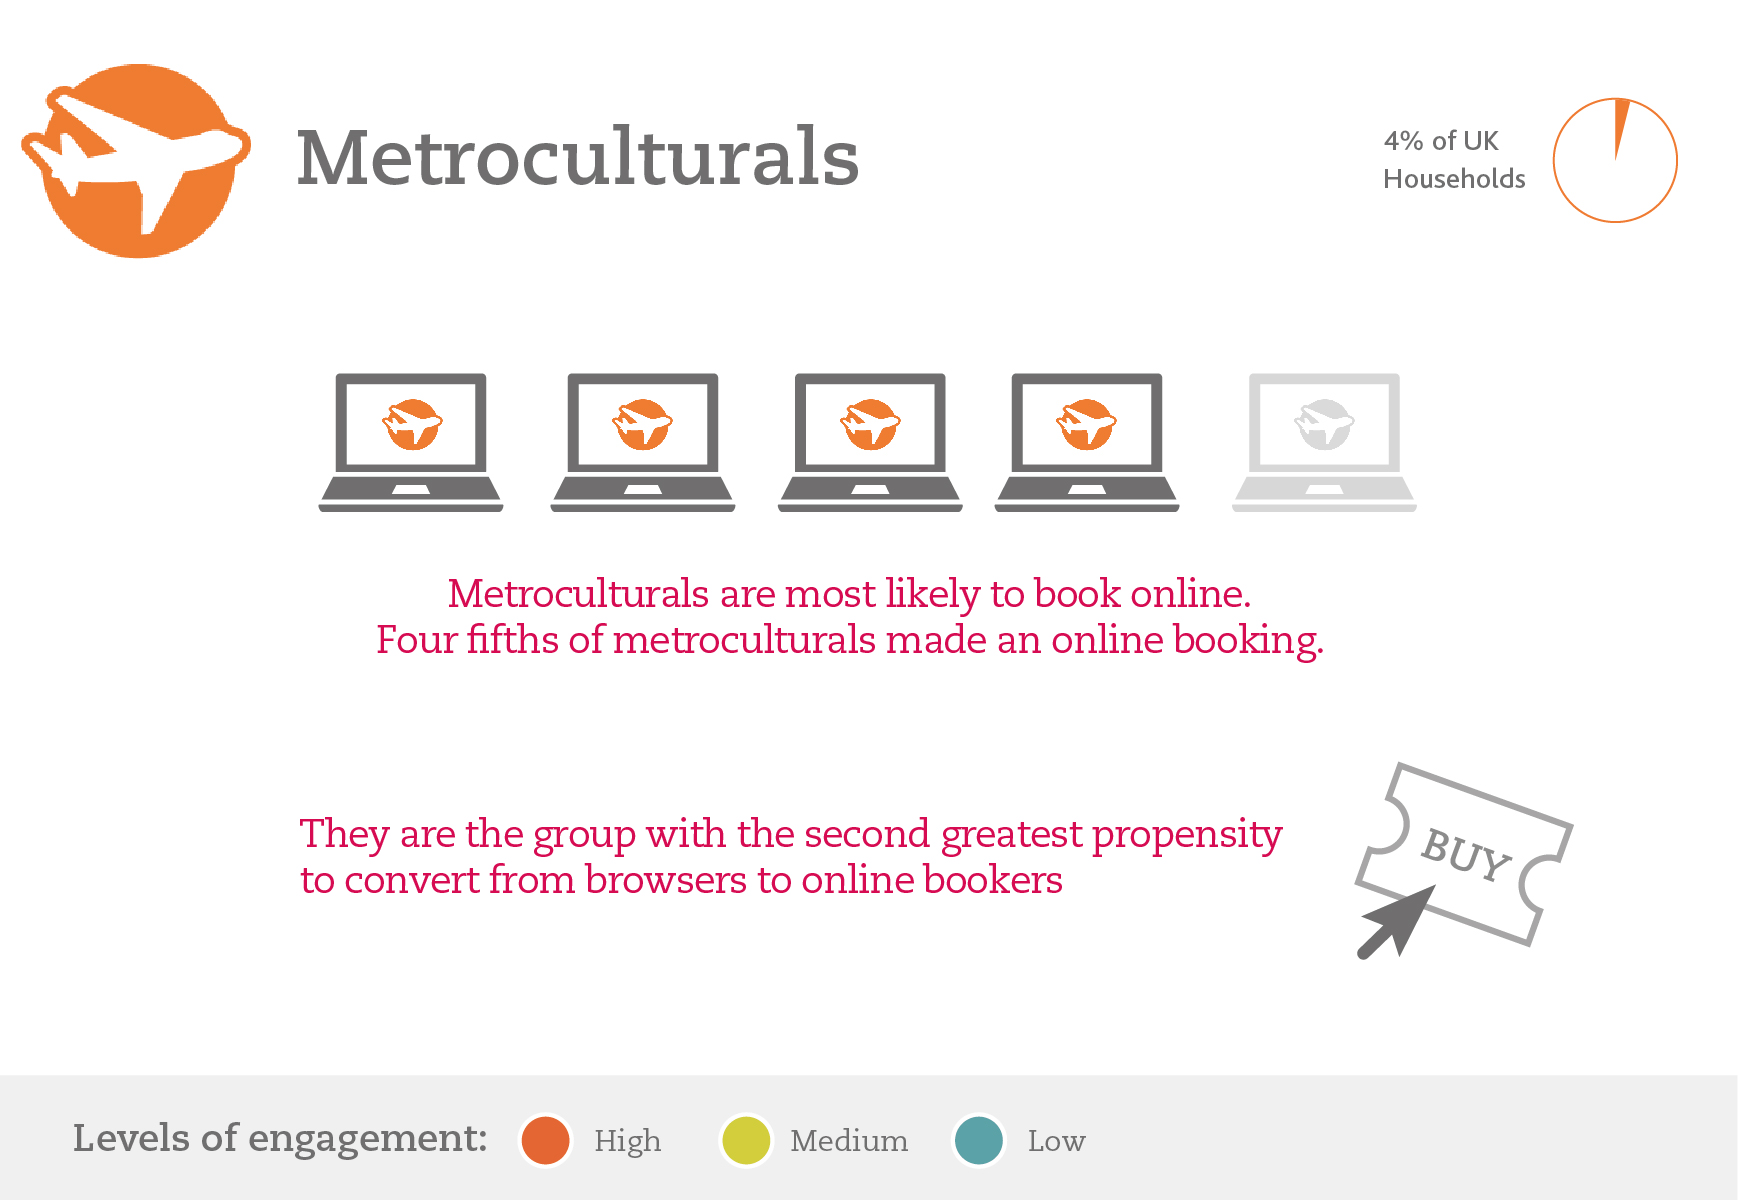 Metroculturals tend to be prosperous, liberal urbanites who are interested in a very wide cultural spectrum. As a group they are highly engaged with the digital world so it is no surprise that they have a high propensity to book online.